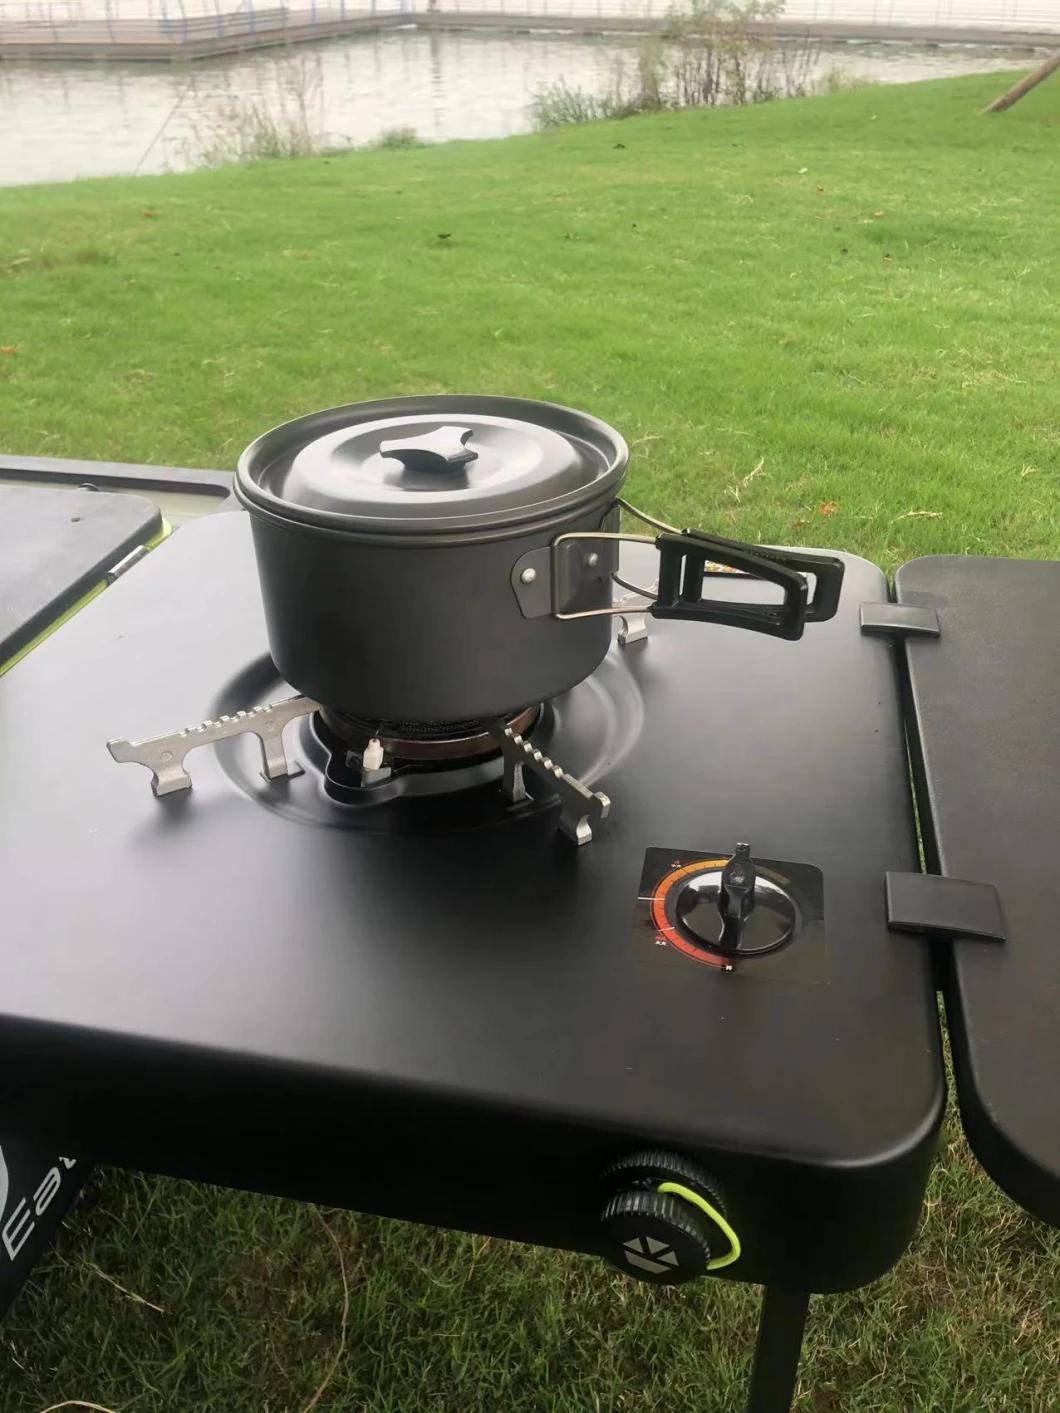 Concise & Useful BBQ Stove for Outdoor Camping